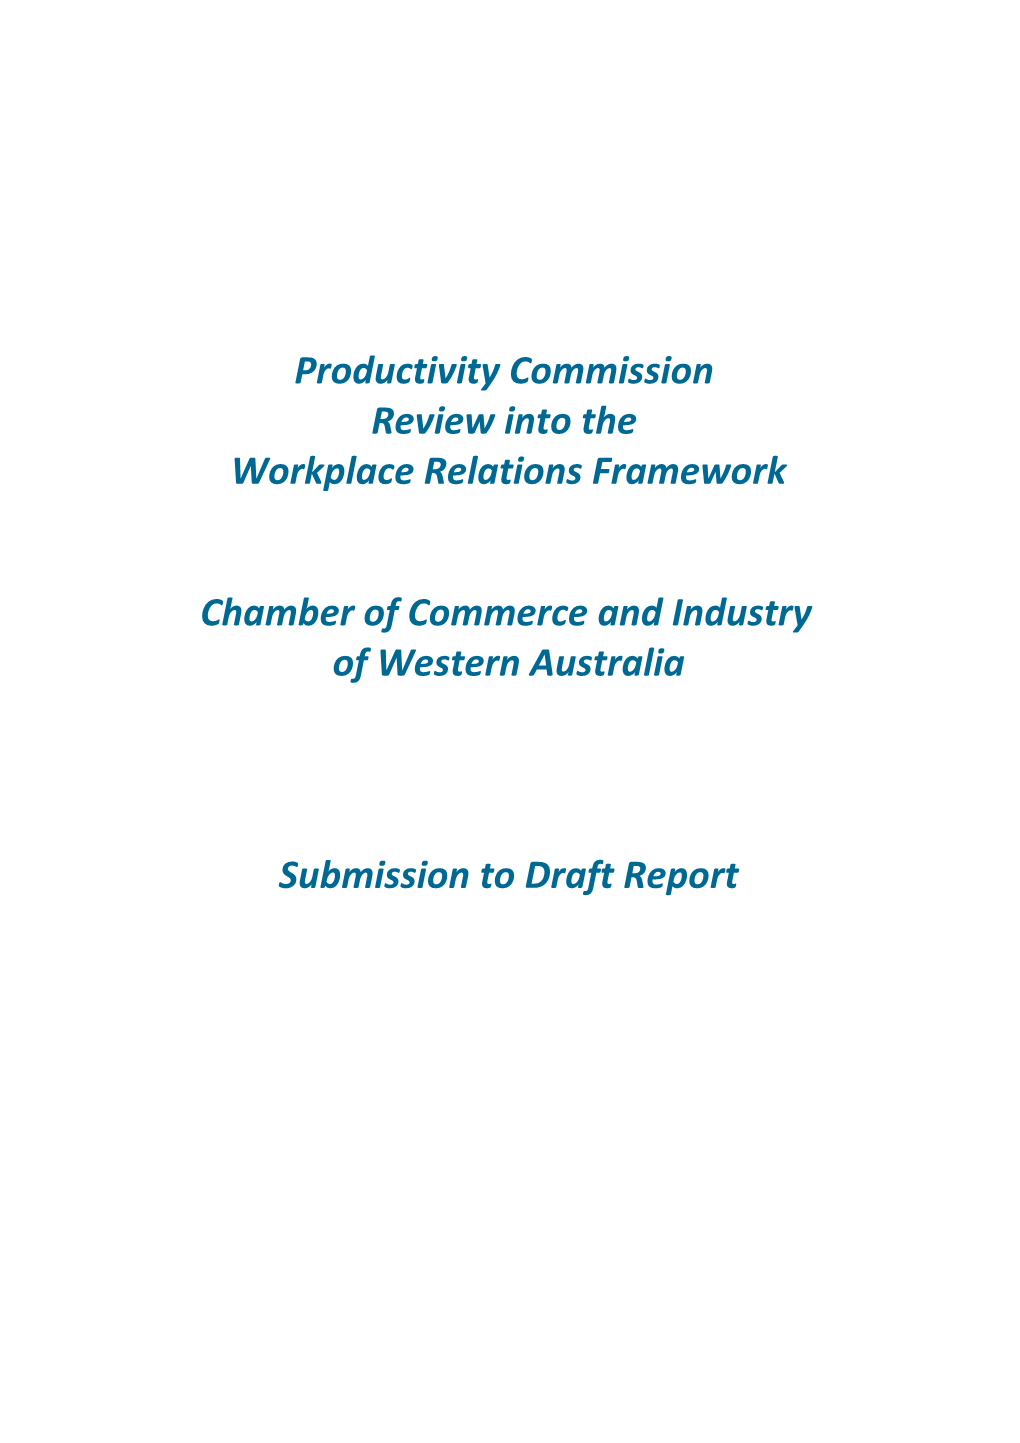 Submission DR323 - Chamber of Commerce and Industry of Western Australia - Workplace Relations